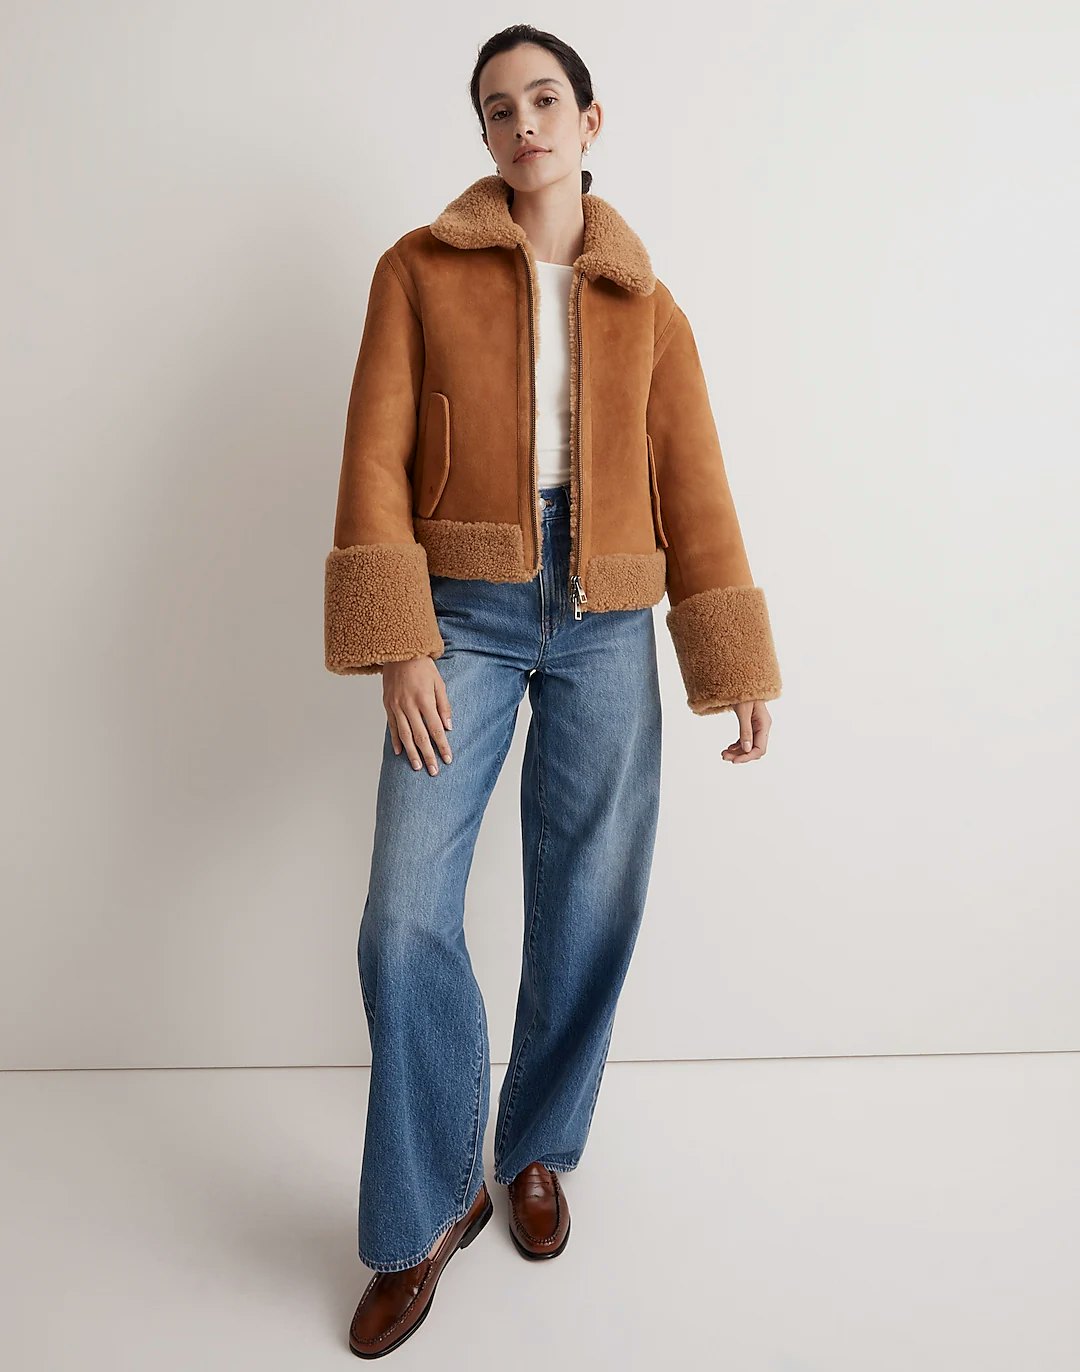 Shearling Jacket Shopping 101: A Primer On Finding Your Perfect Style